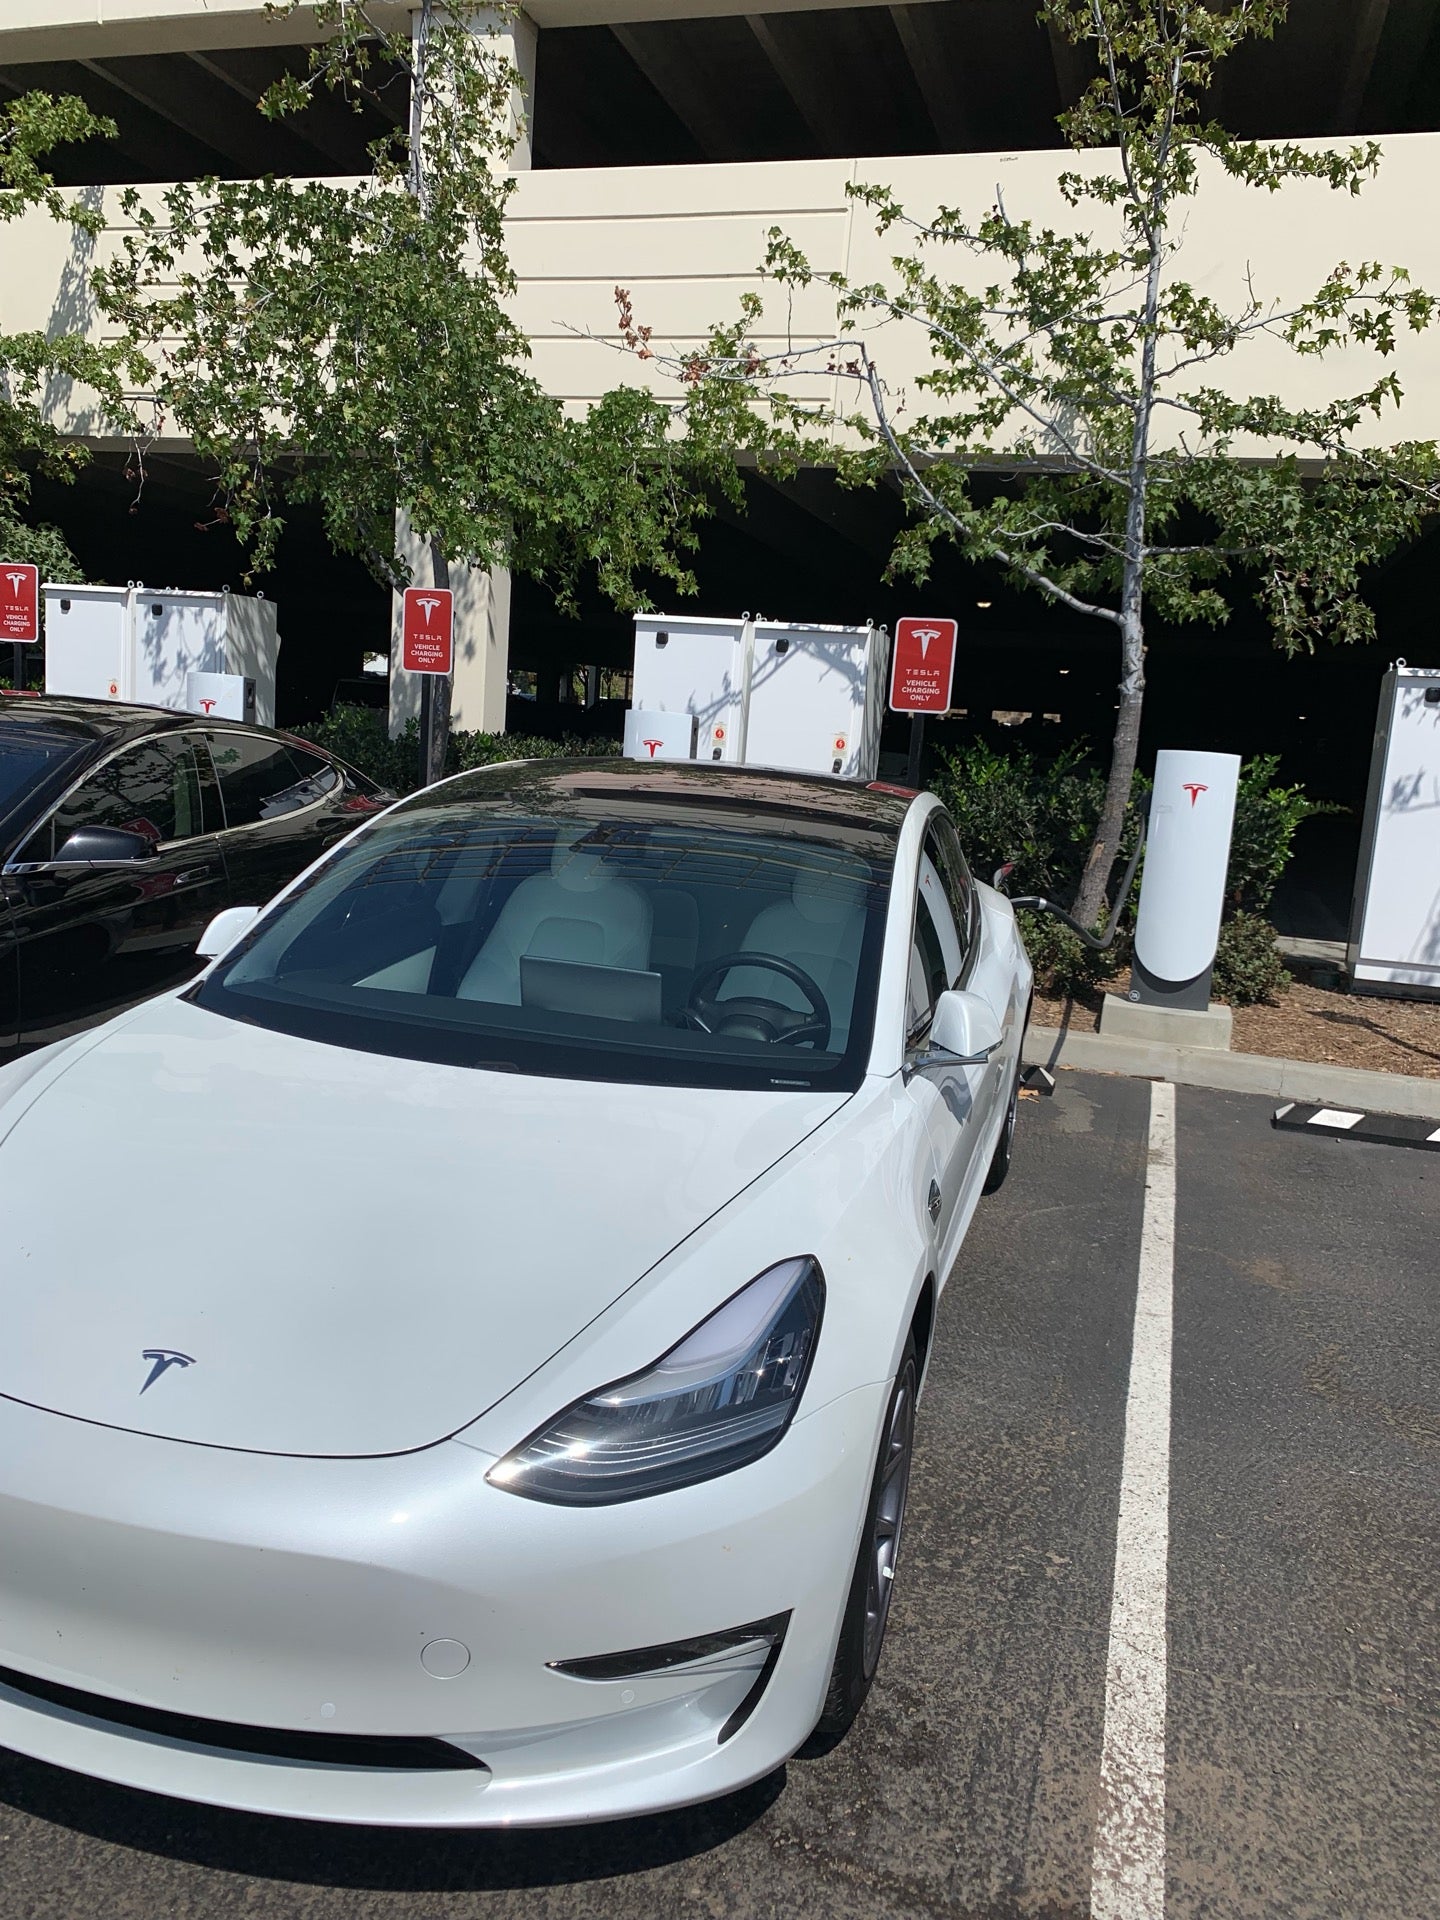 Fashion Valley Mall San Diego Supercharger Bad Road. Please Help Fix It 